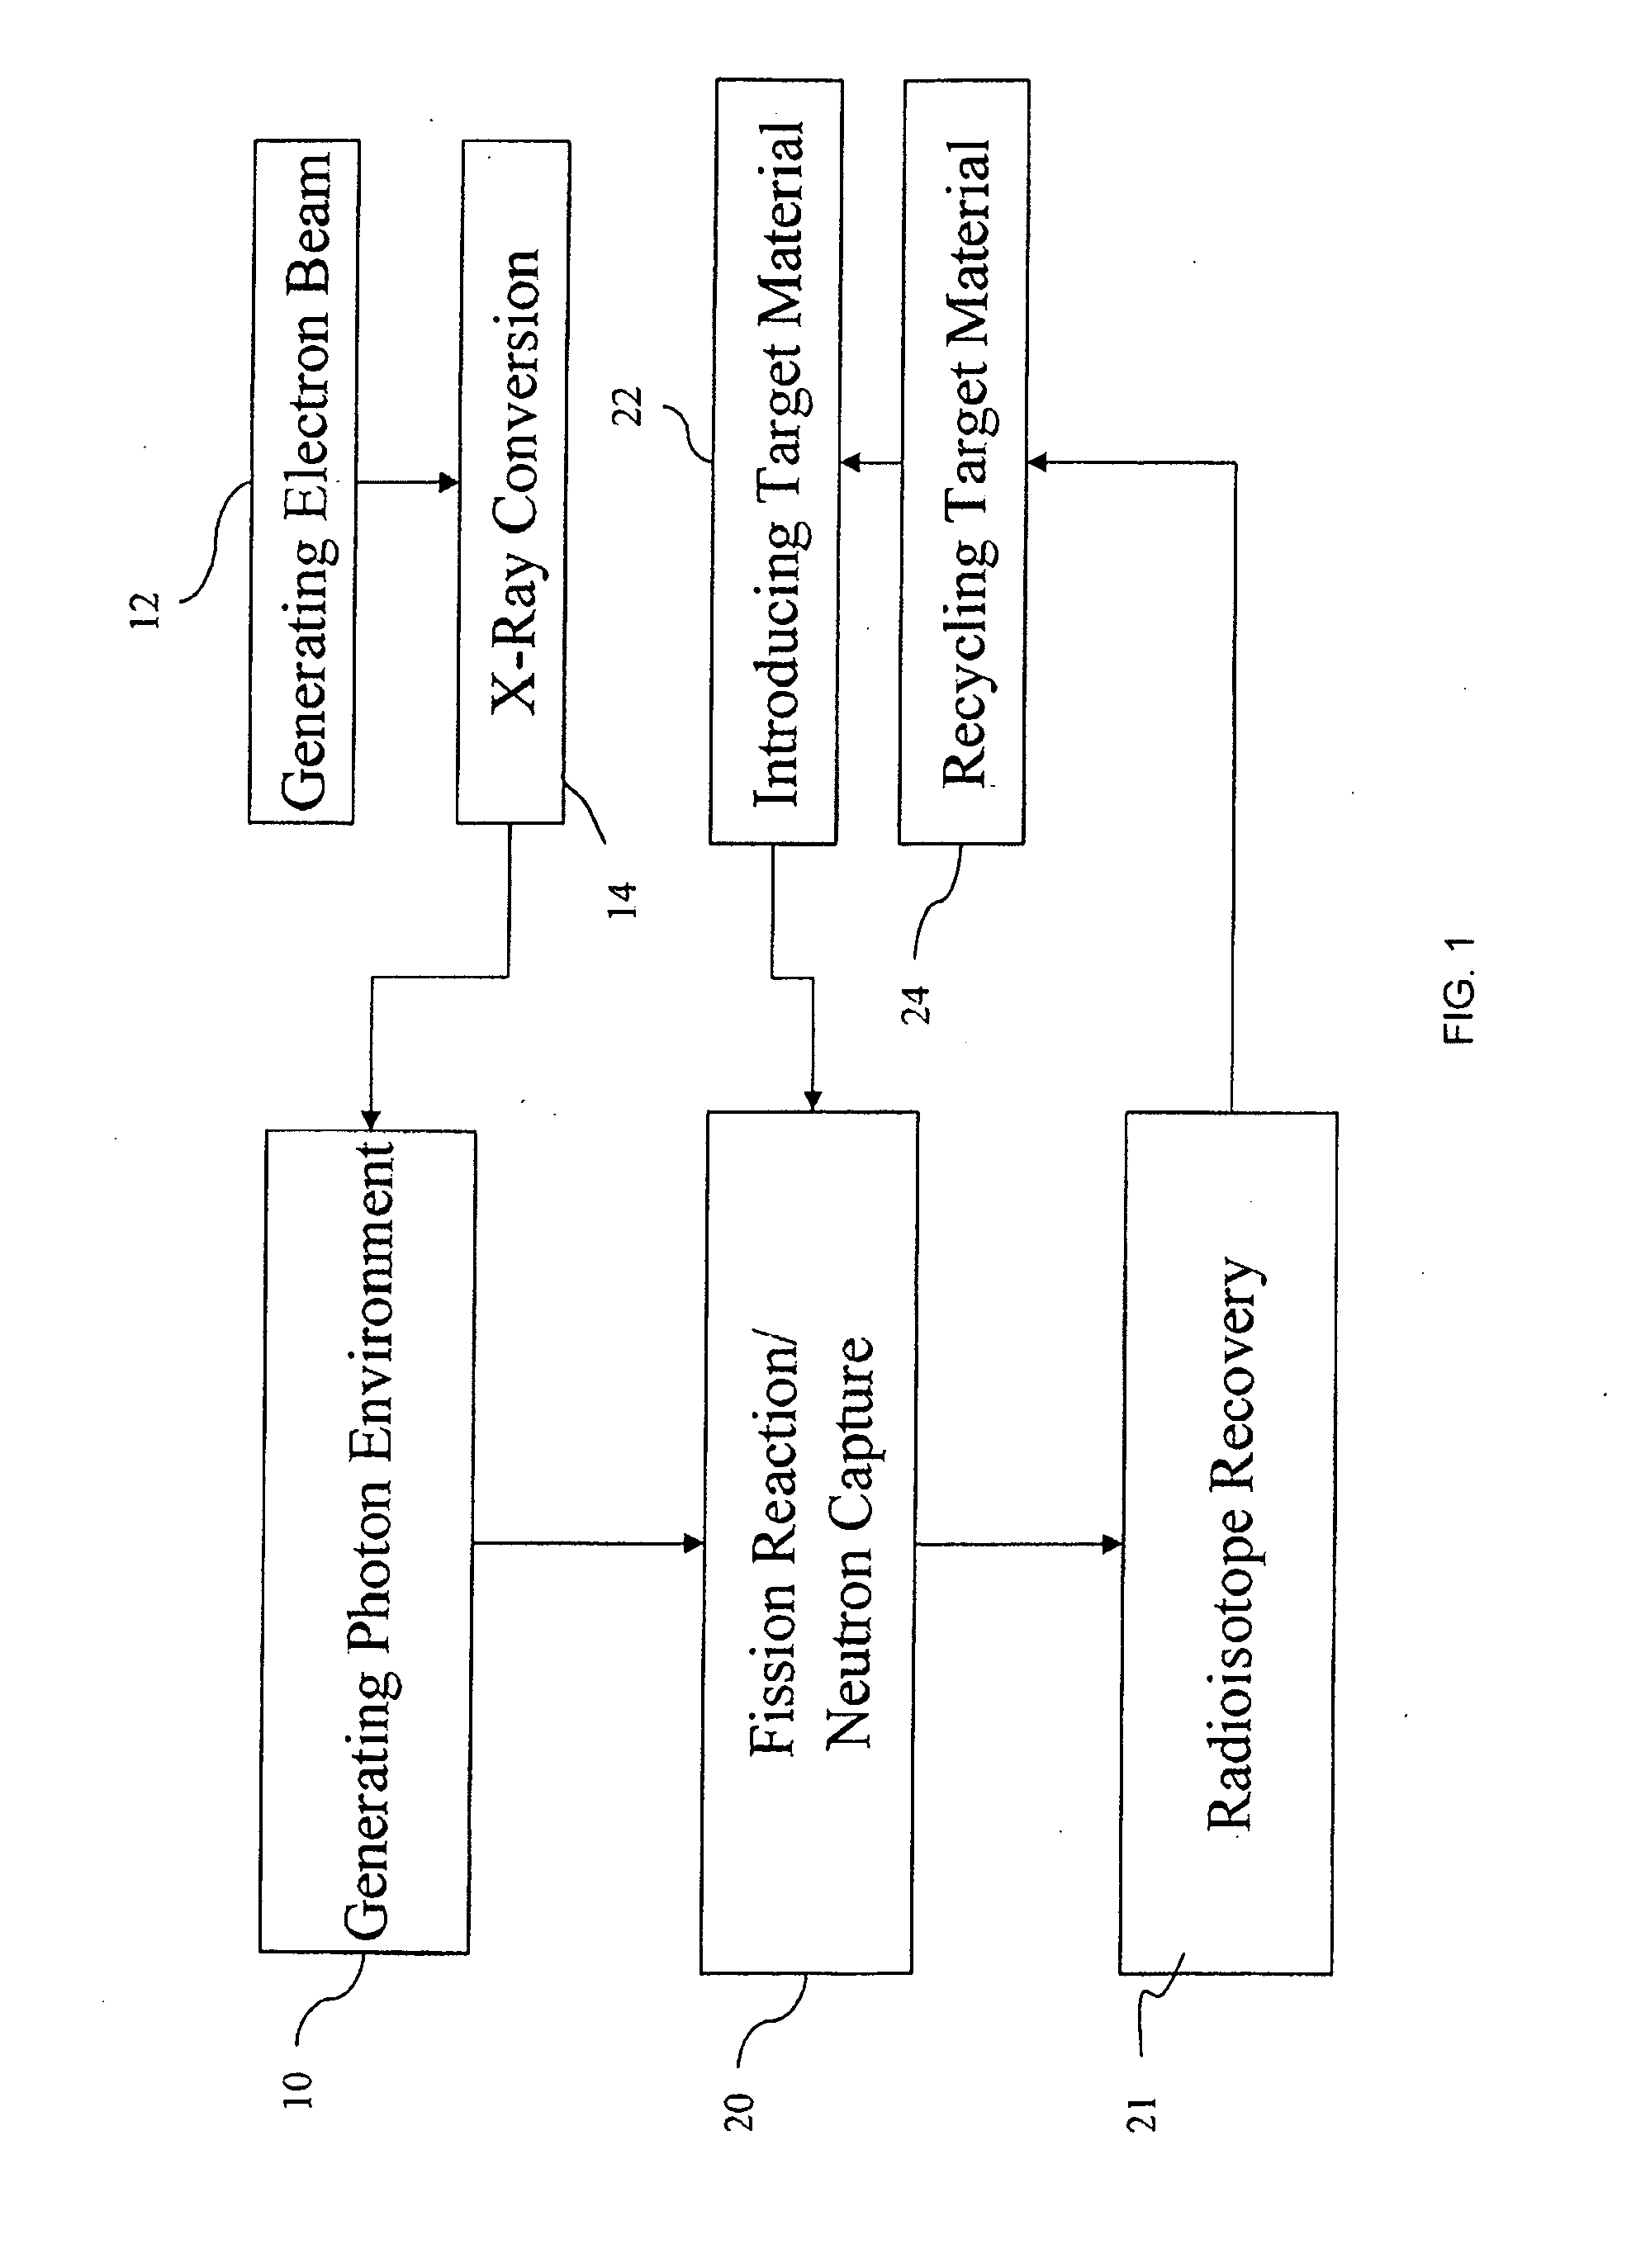 Radioisotope production and treatment of solution of target material